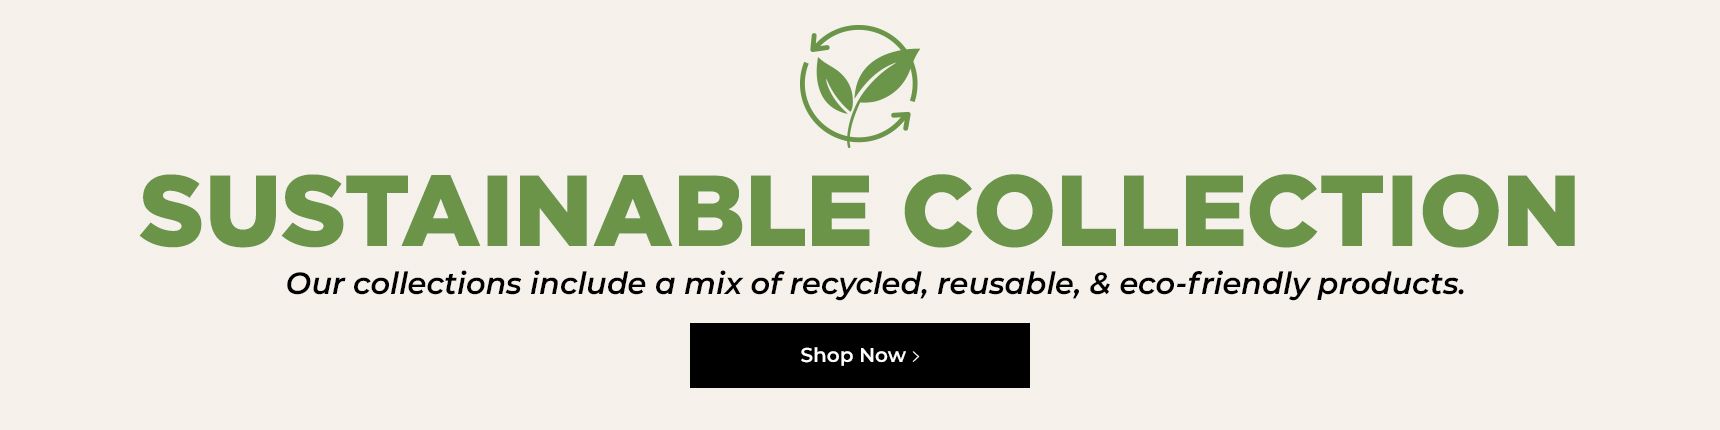 Sustainable collection. Our collections include a mix of recycled, reusable & eco-friendly products.